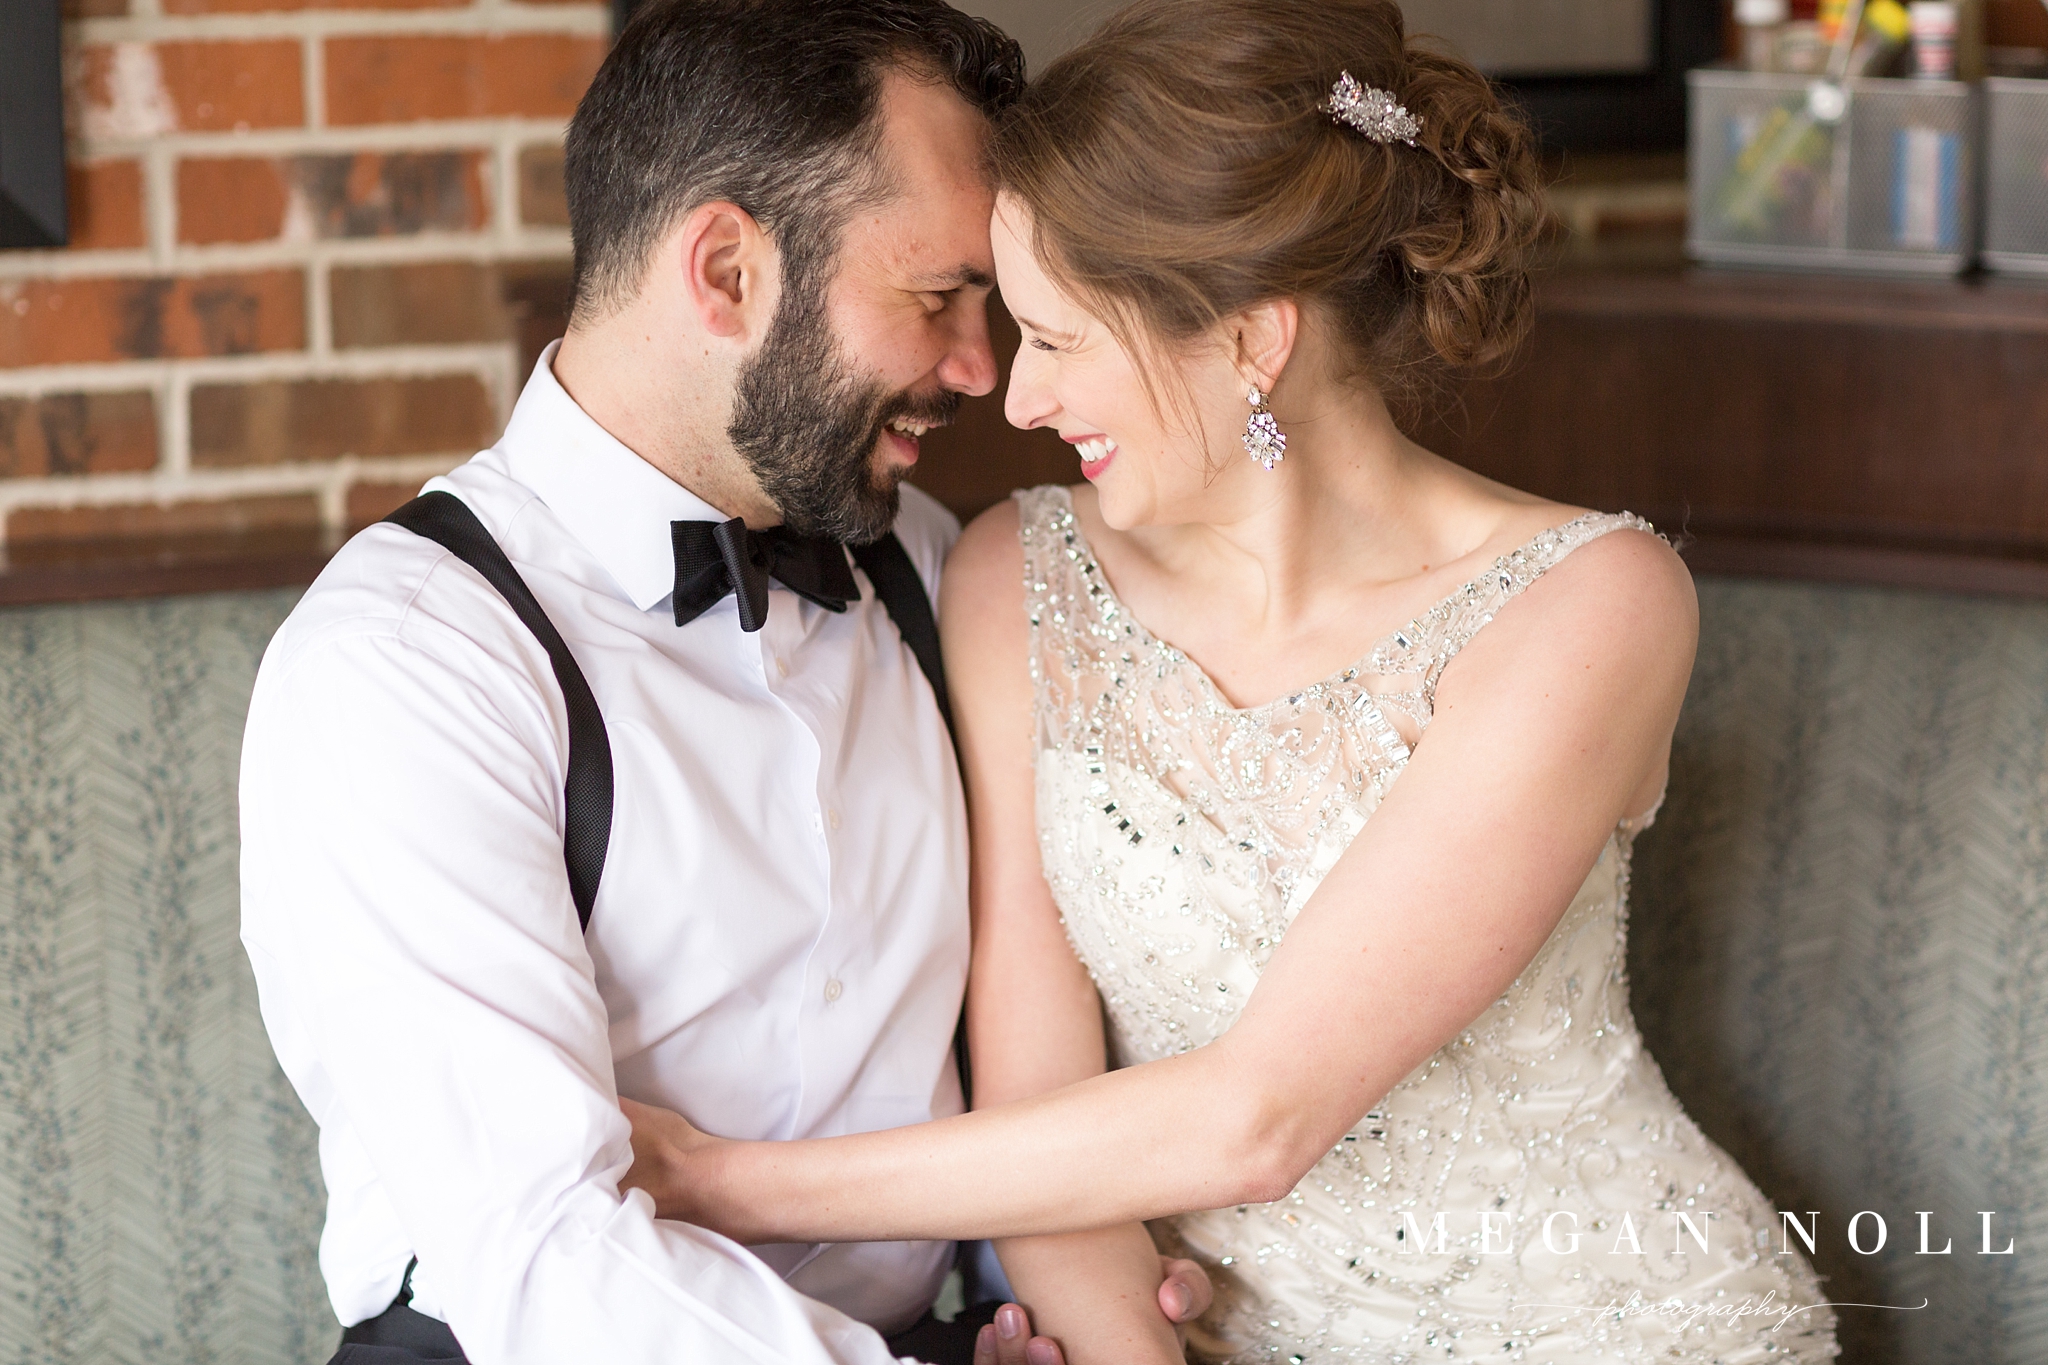 Jefferson Social, Bride and Groom Portraits, Indoor picture locations